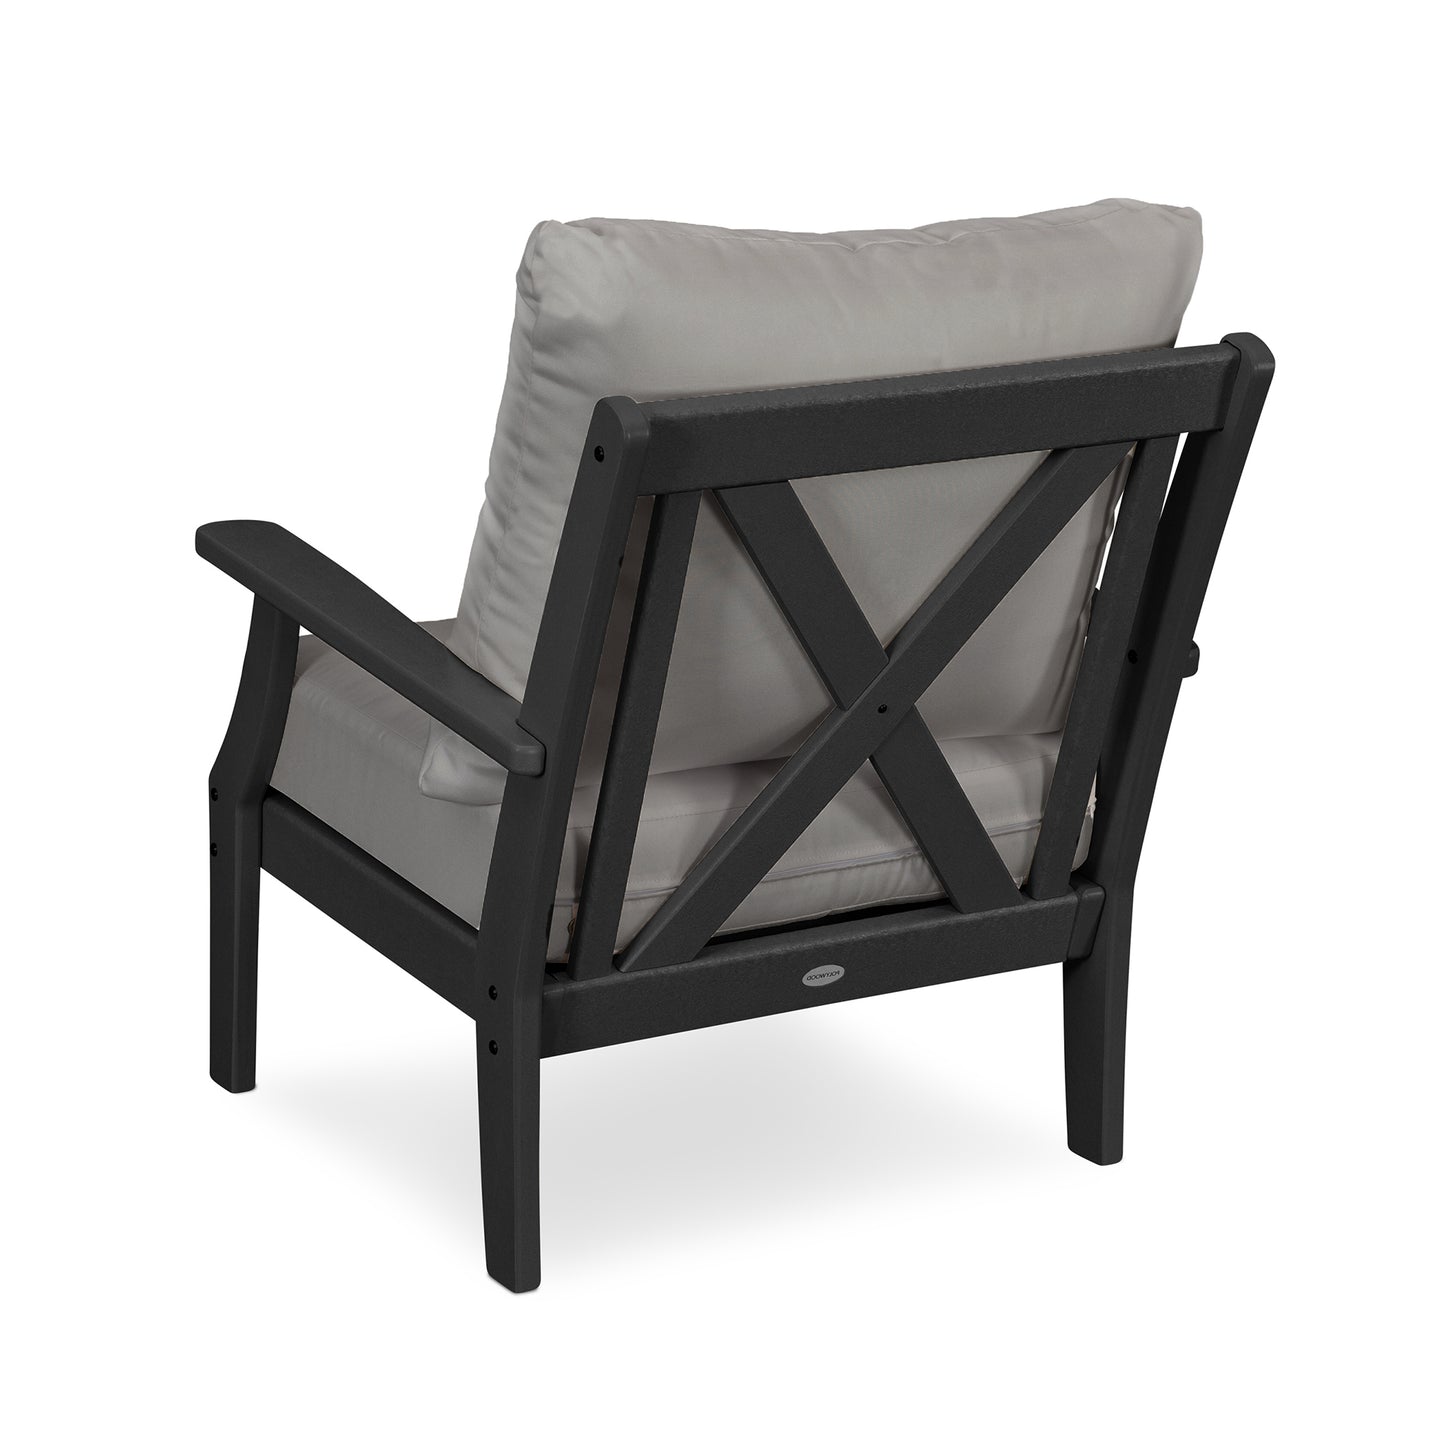 A modern black POLYWOOD® Braxton Deep Seating Chair with a gray cushion and a crisscross design on the sides, isolated on a white background.